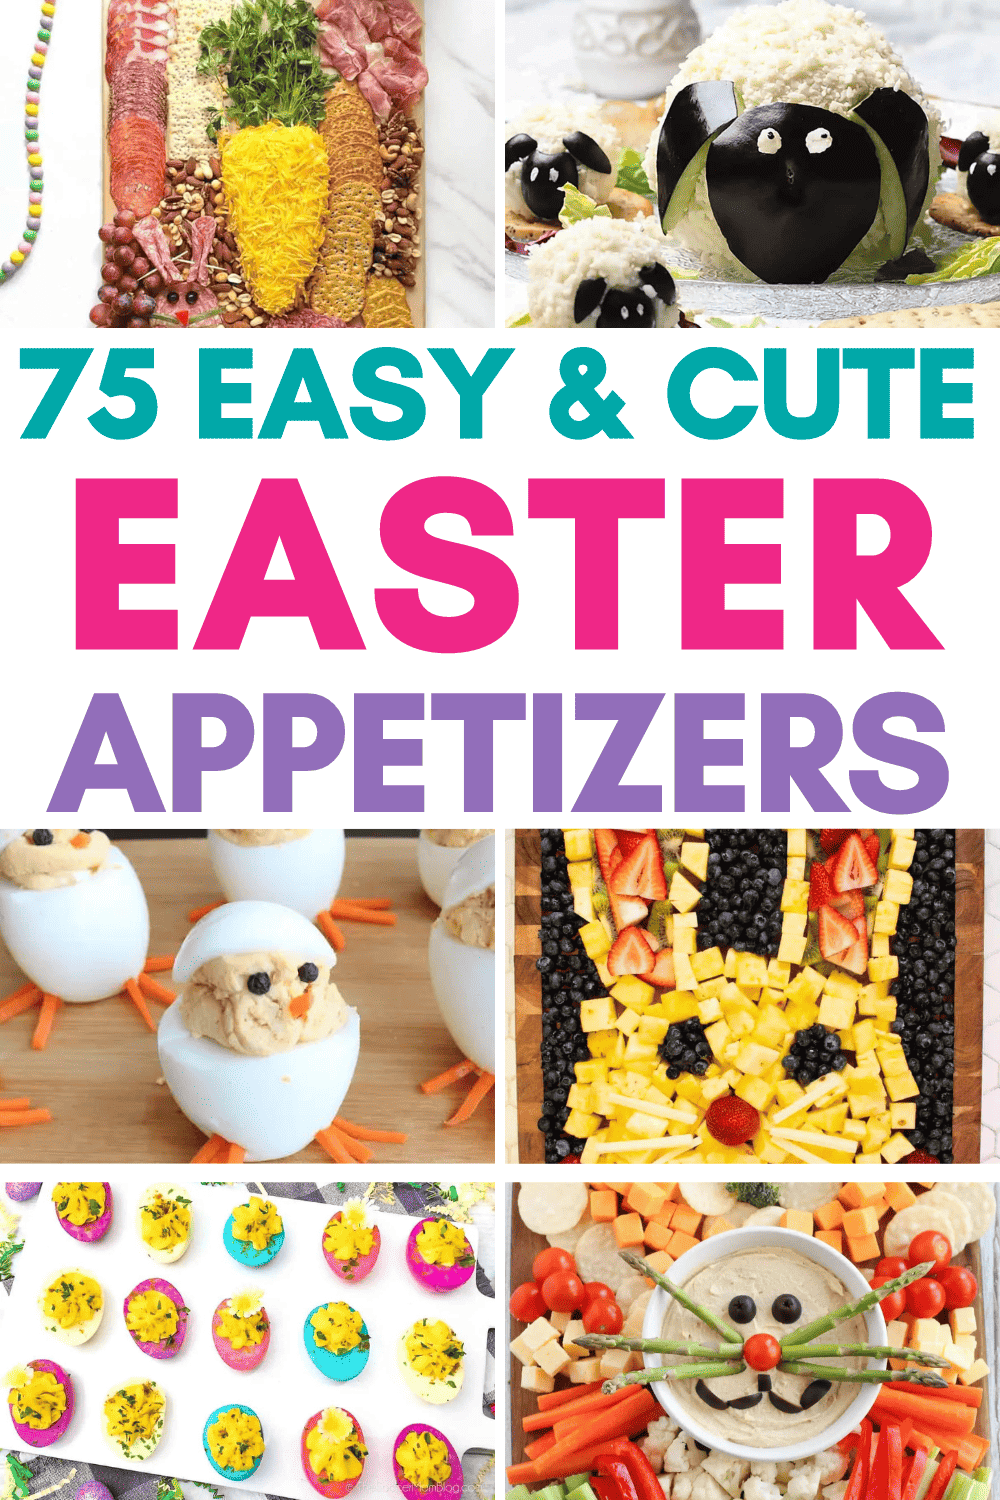 Easy cute Easter appetizers ideas! Fun Easter appetizers ideas parties, easter food appetizers parties appetizer ideas, easter food ideas appetizers dishes, easter appetizer recipes easy, easter food ideas appetizers simple, easter food ideas appetizers spring, easter food ideas dinner appetizers, easter appetizers easy dip recipes, easter themed food appetizers, finger foods for easter appetizer ideas, holiday appetizers easter, easter appetizers easy snacks, easy easter food ideas appetizers.